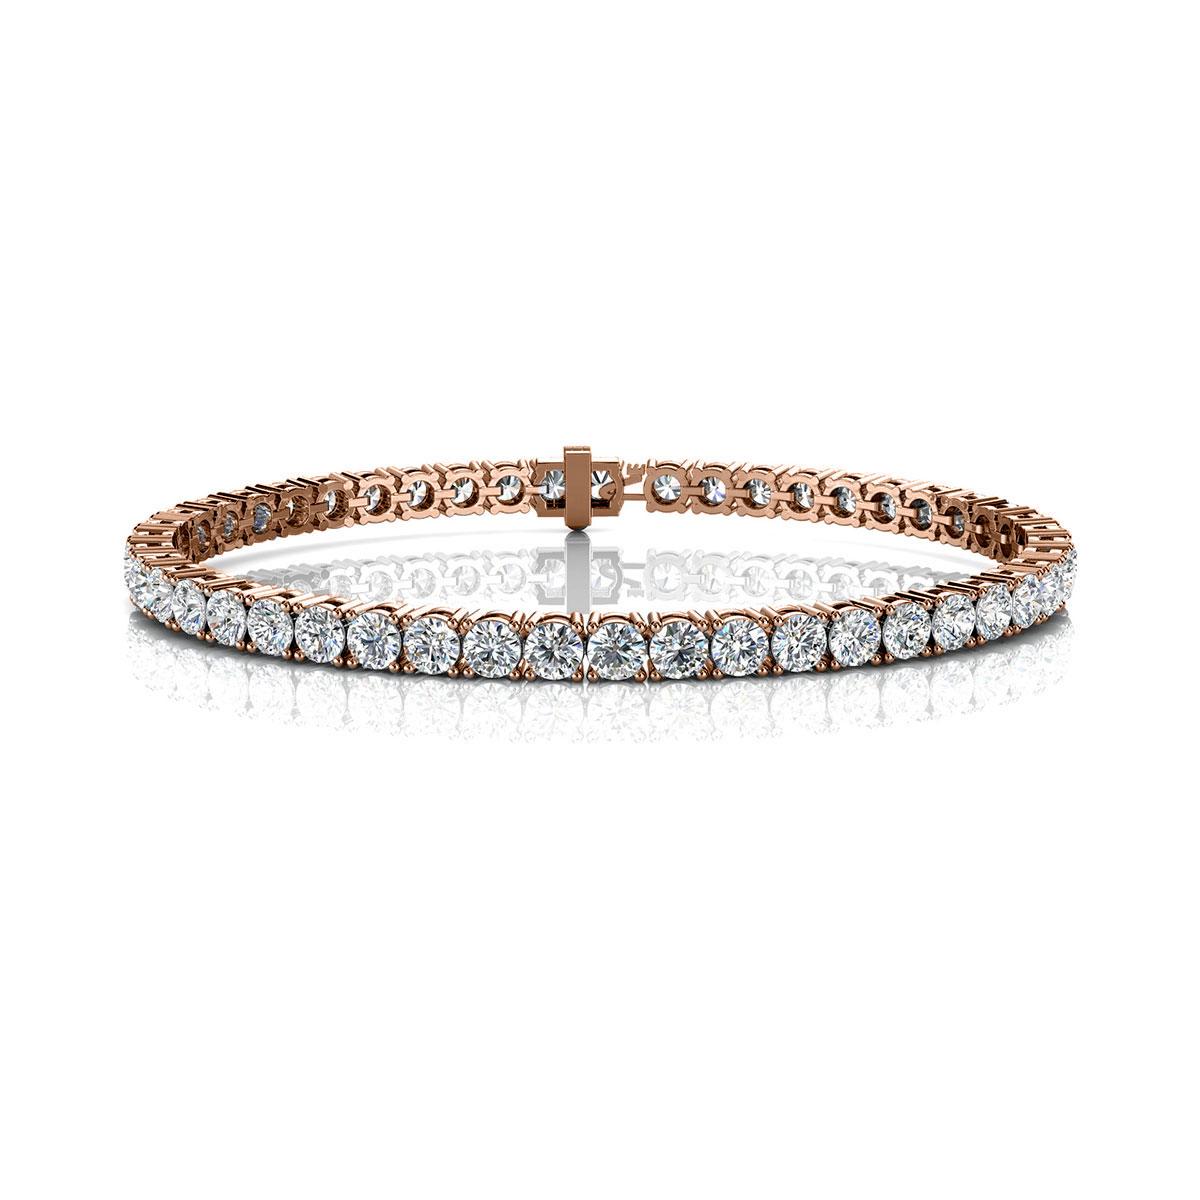 A timeless four prongs diamonds tennis bracelet. Experience the Difference!

Product details: 

Center Gemstone Type: NATURAL DIAMOND
Center Gemstone Color: WHITE
Center Gemstone Shape: ROUND
Center Diamond Carat Weight: 7
Metal: 18K Rose Gold
Metal